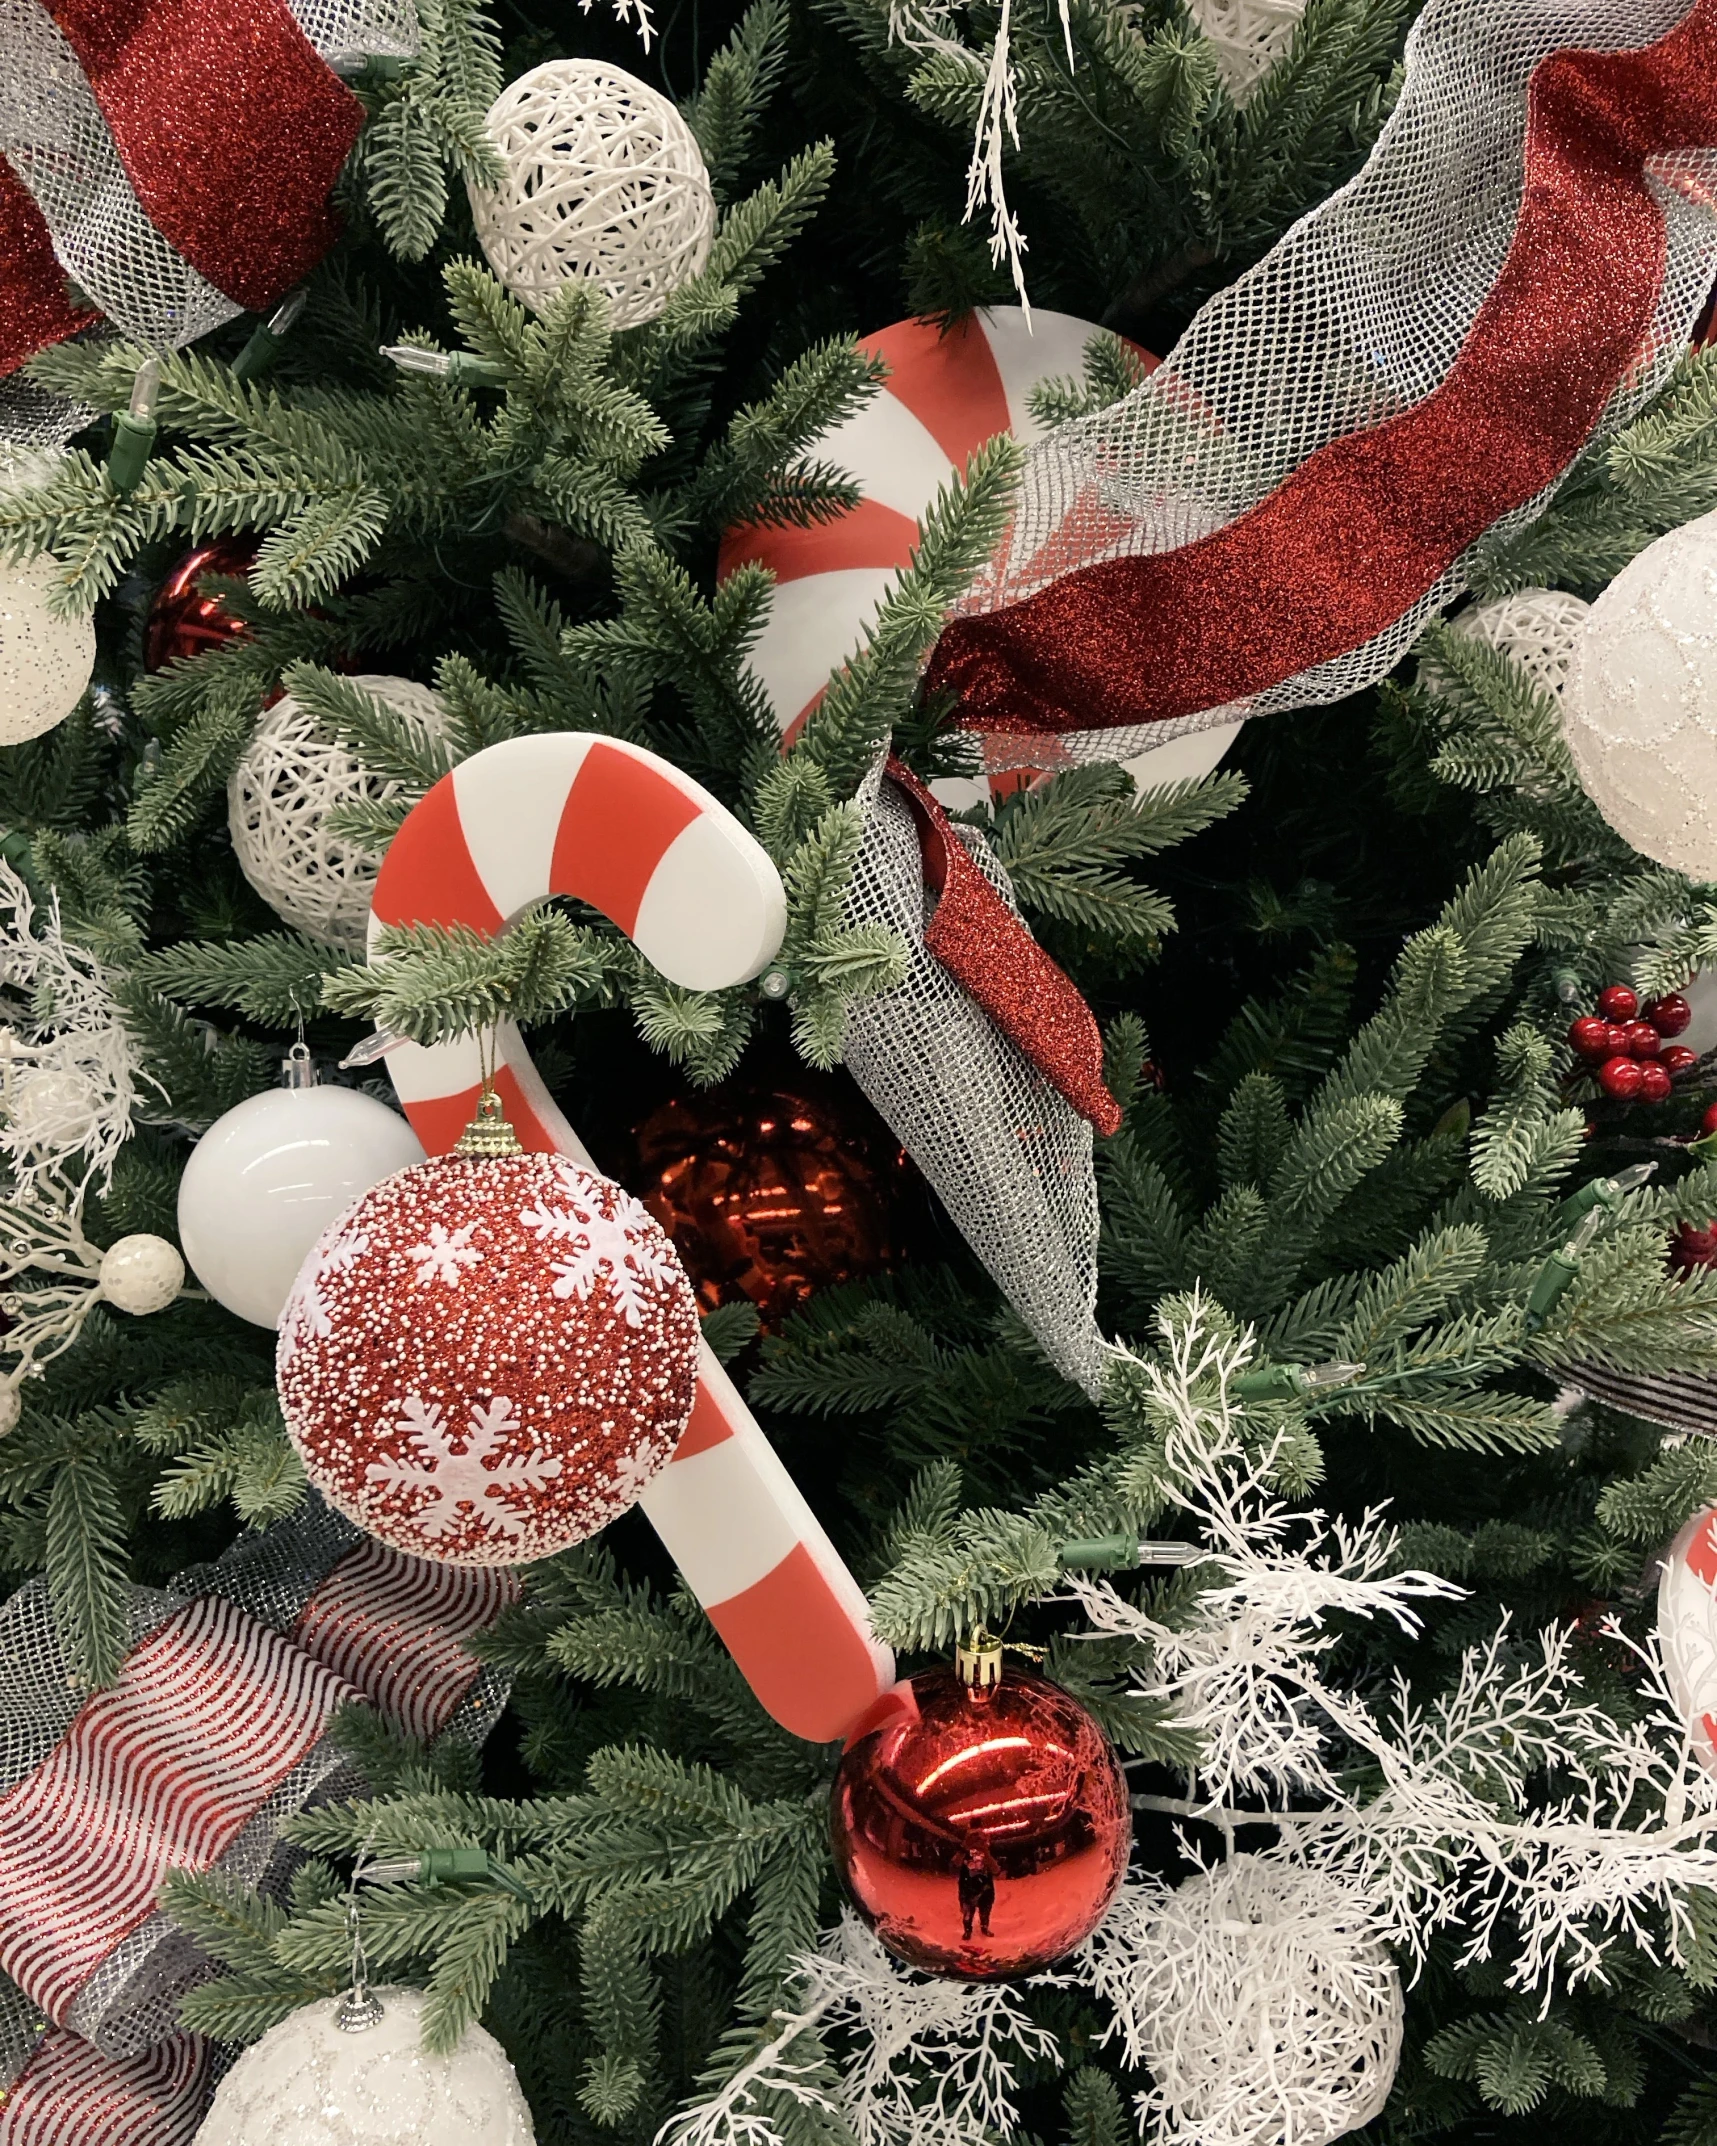 a close up of a christmas tree with ornaments, candy canes, payne's grey and venetian red, 2019 trending photo, multiple stories